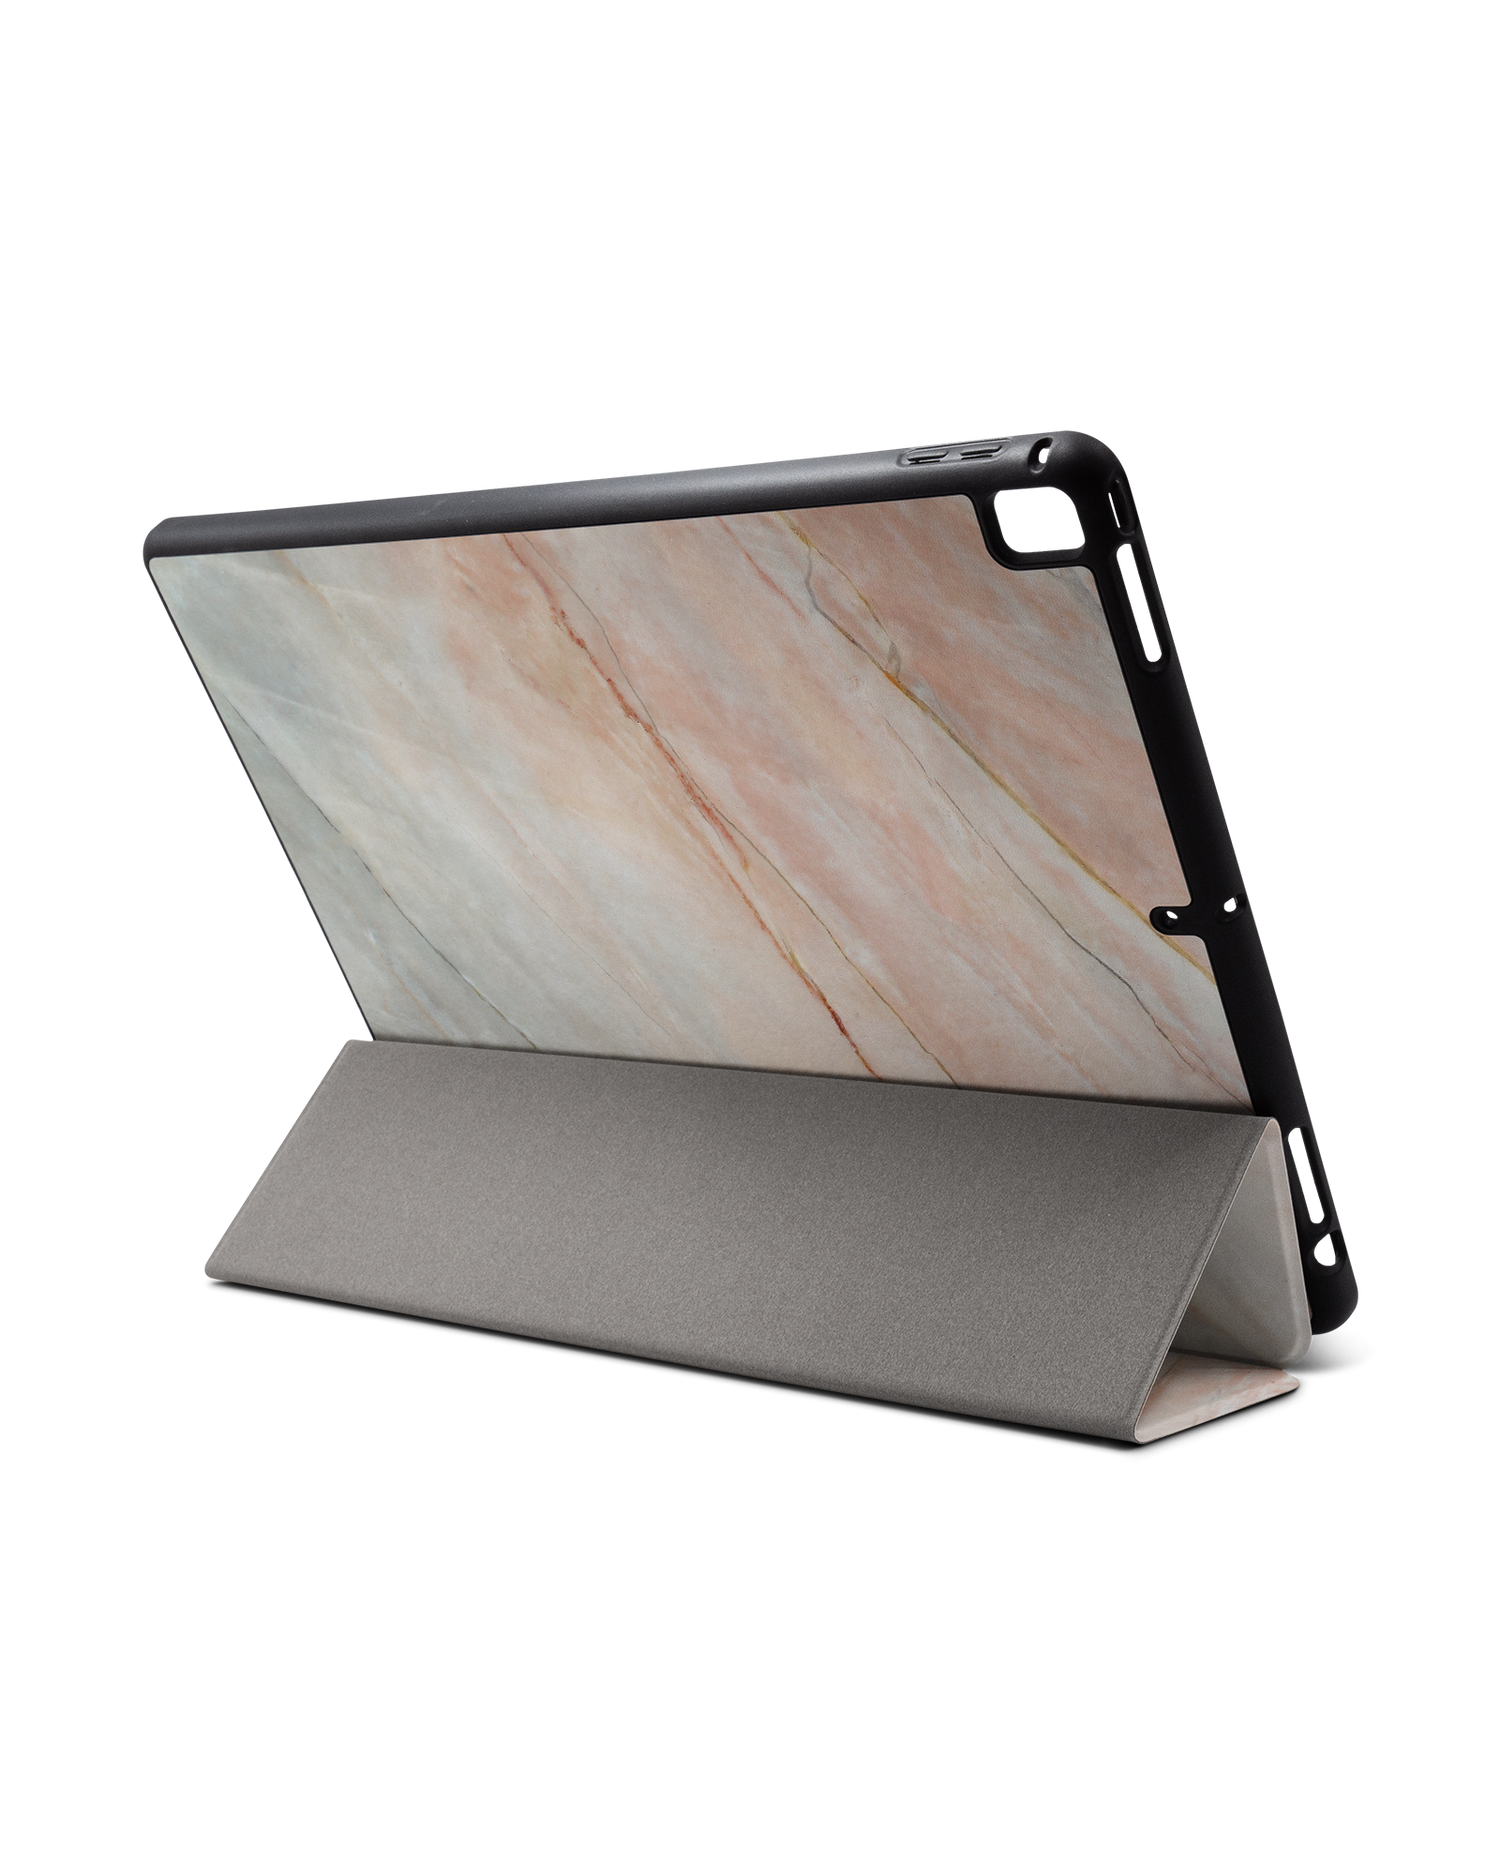 Mother of Pearl Marble iPad Case with Pencil Holder for Apple iPad Pro 2 12.9